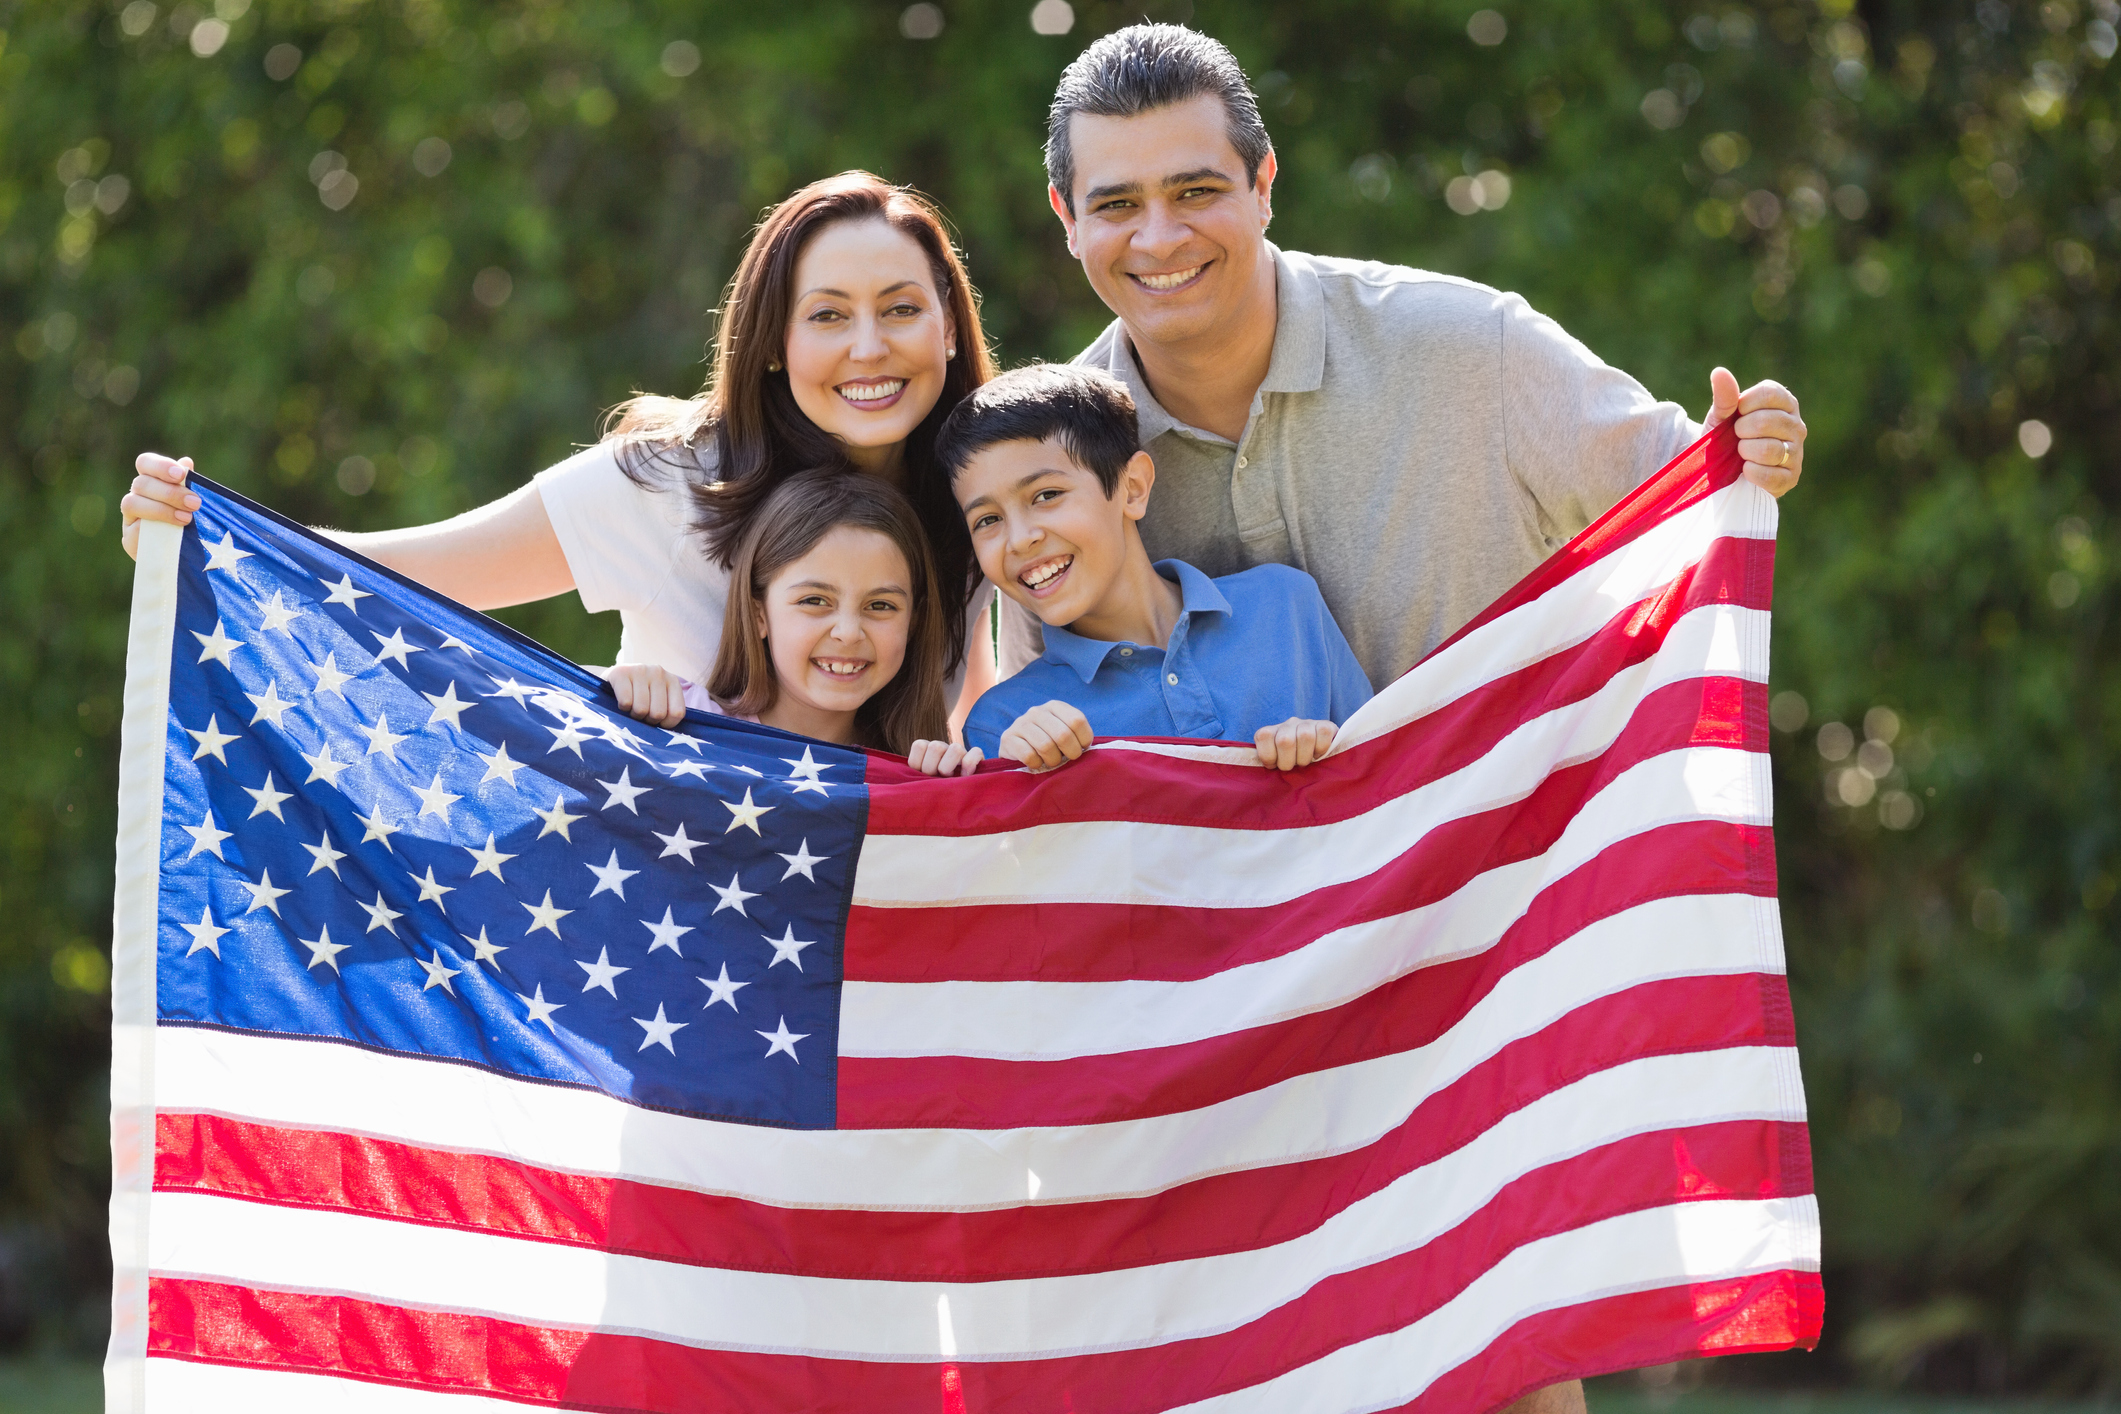 Family Smiling While Holding American Flag At Park